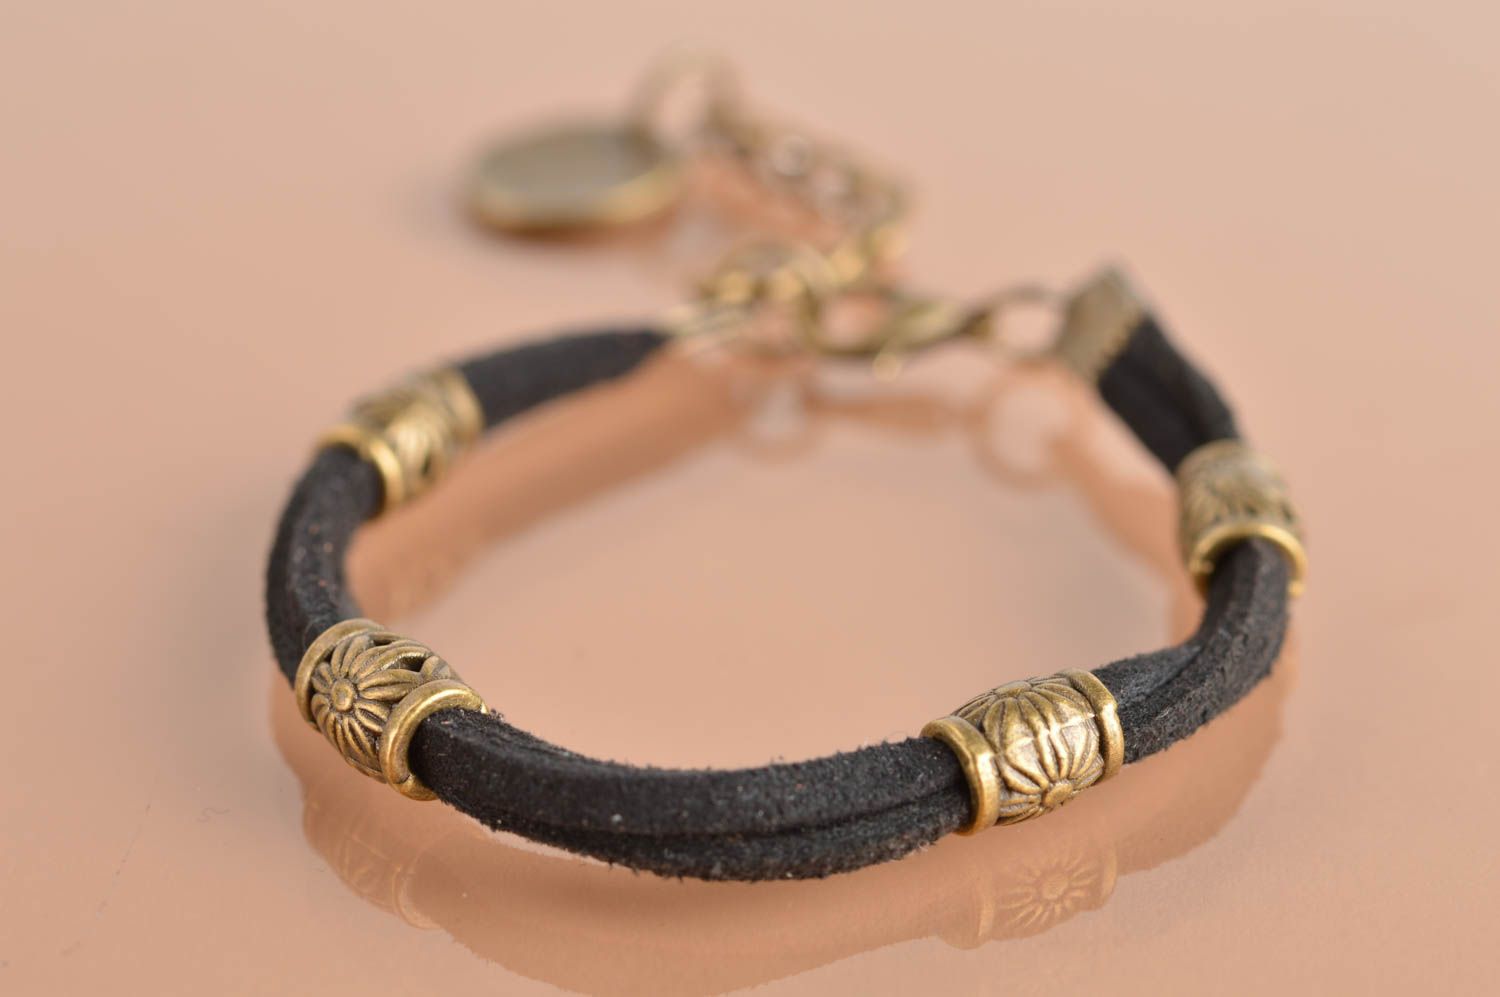 Handmade stylish black with metal cute bracelet made of chamois leather lace  photo 2